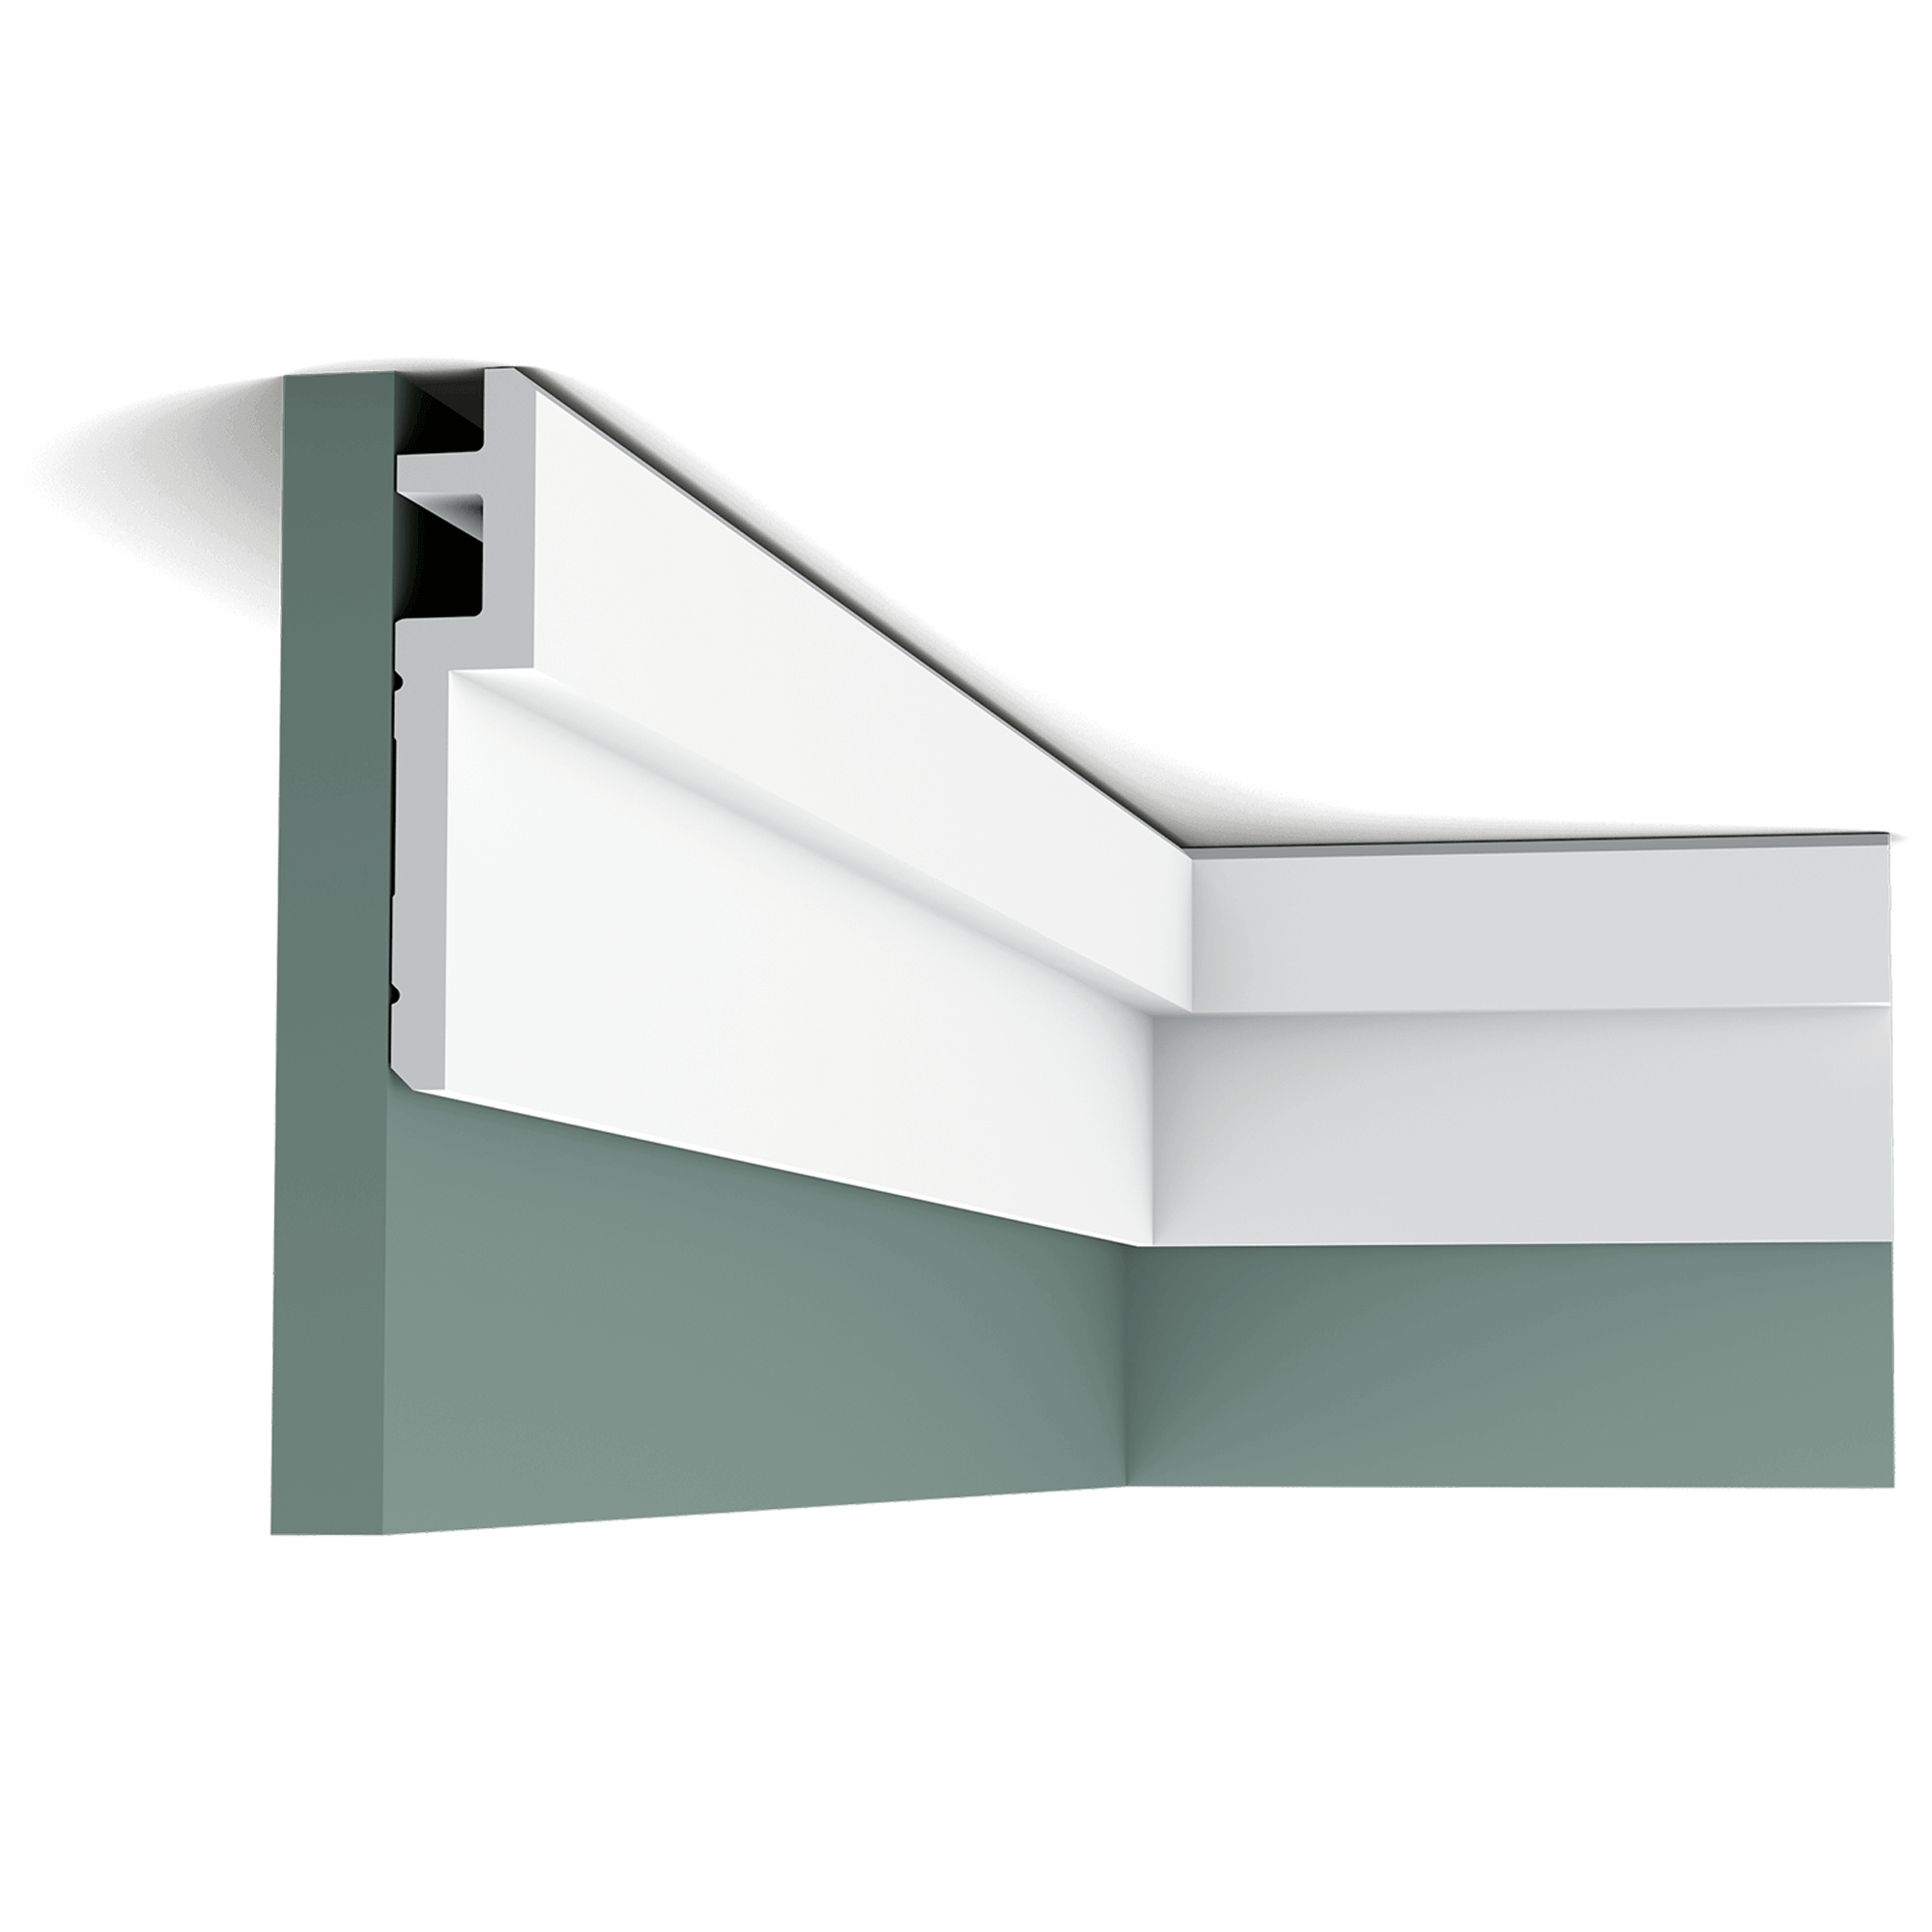 c395 border f567 A clean, modern profile from the Steps range. Here we fix the largest section to the wall for an elevated effect. The angled corners above and below provide additional subtle shadow lines. Designed by Orio Tonini.